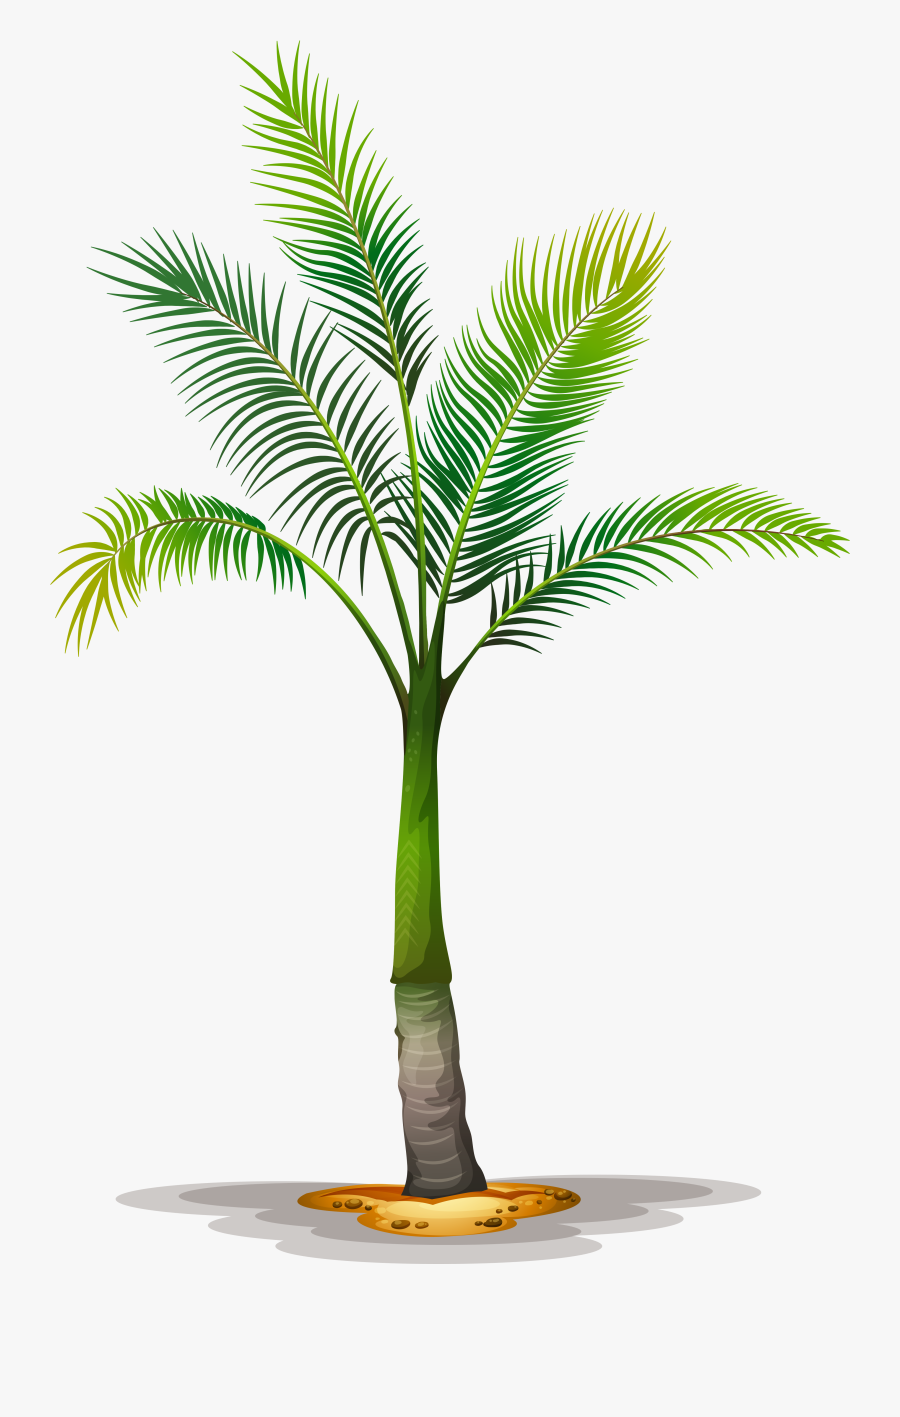 Date Palm Clipart Tropical Tree - Palm Tree Png File Free Download, Transparent Clipart